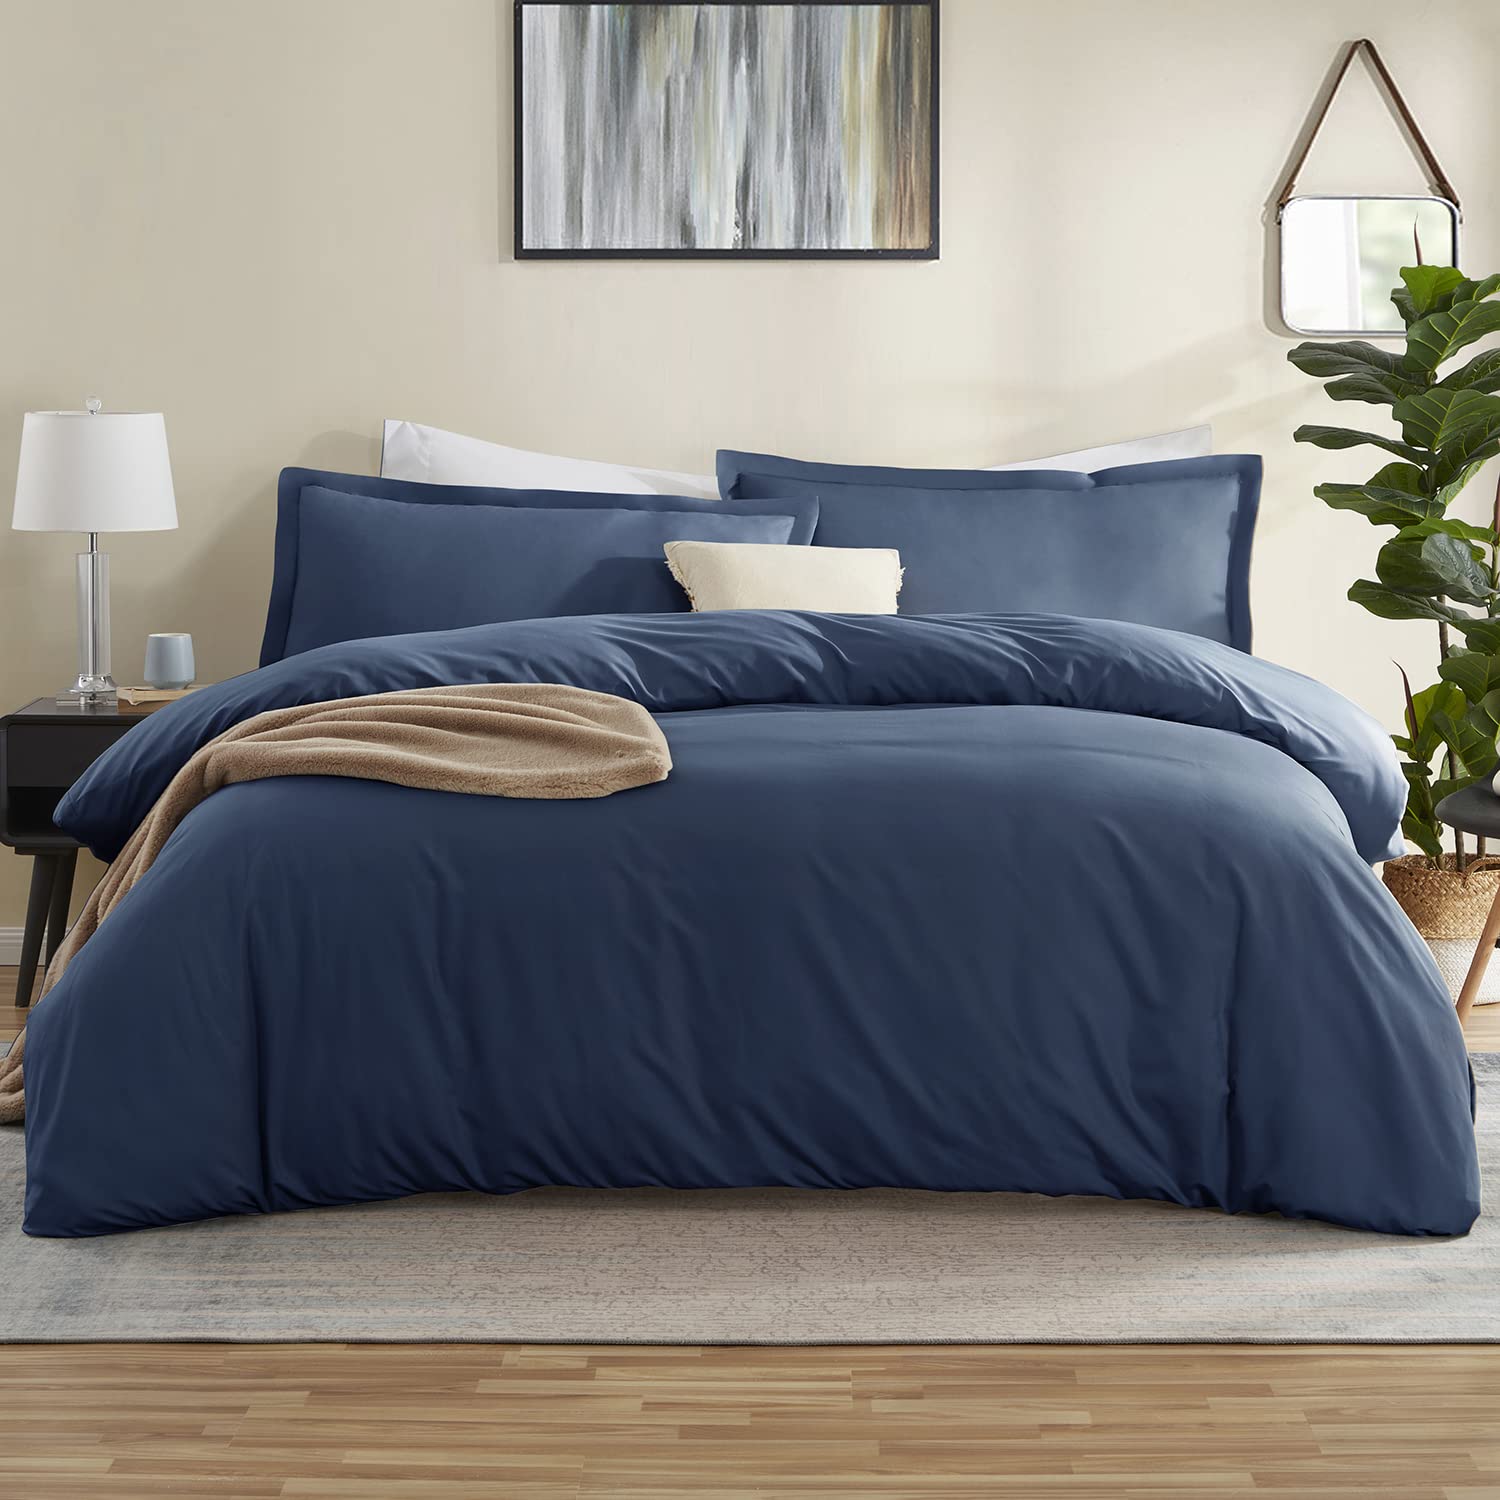 Book Cover Nestl Navy Blue Twin Duvet Cover Set – Duvet Cover Twin Size Duvet Cover – Twin Comforter Cover Twin Cover (Comforter Not Included) – 2 Piece Set with 1 Pillow Shams Soft Fabric Easy Care